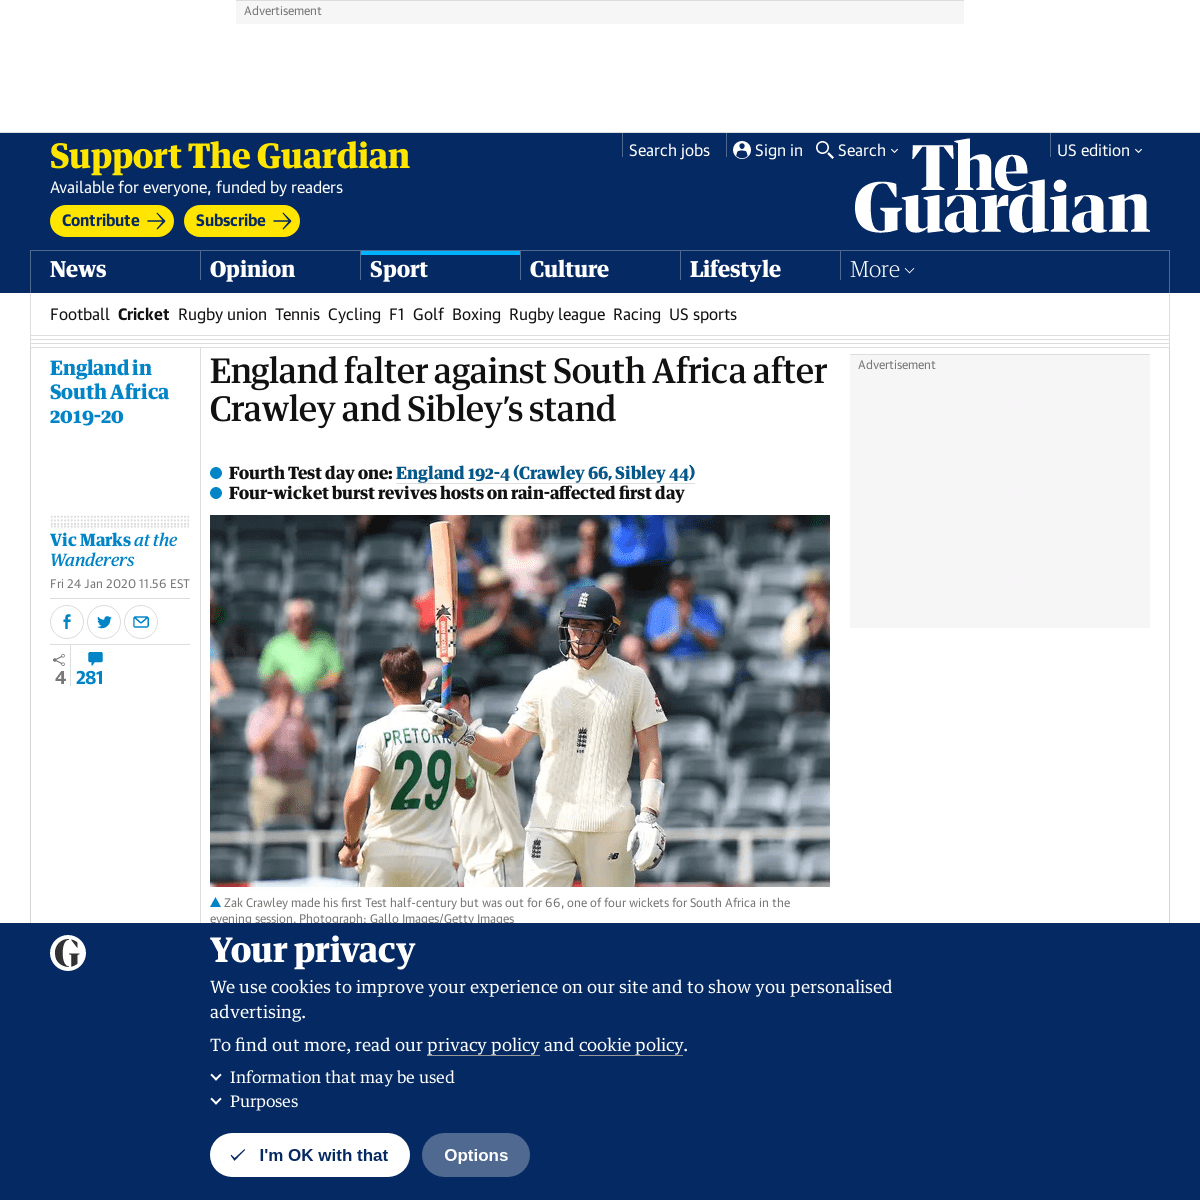 A complete backup of www.theguardian.com/sport/2020/jan/24/south-africa-england-fourth-test-day-one-report